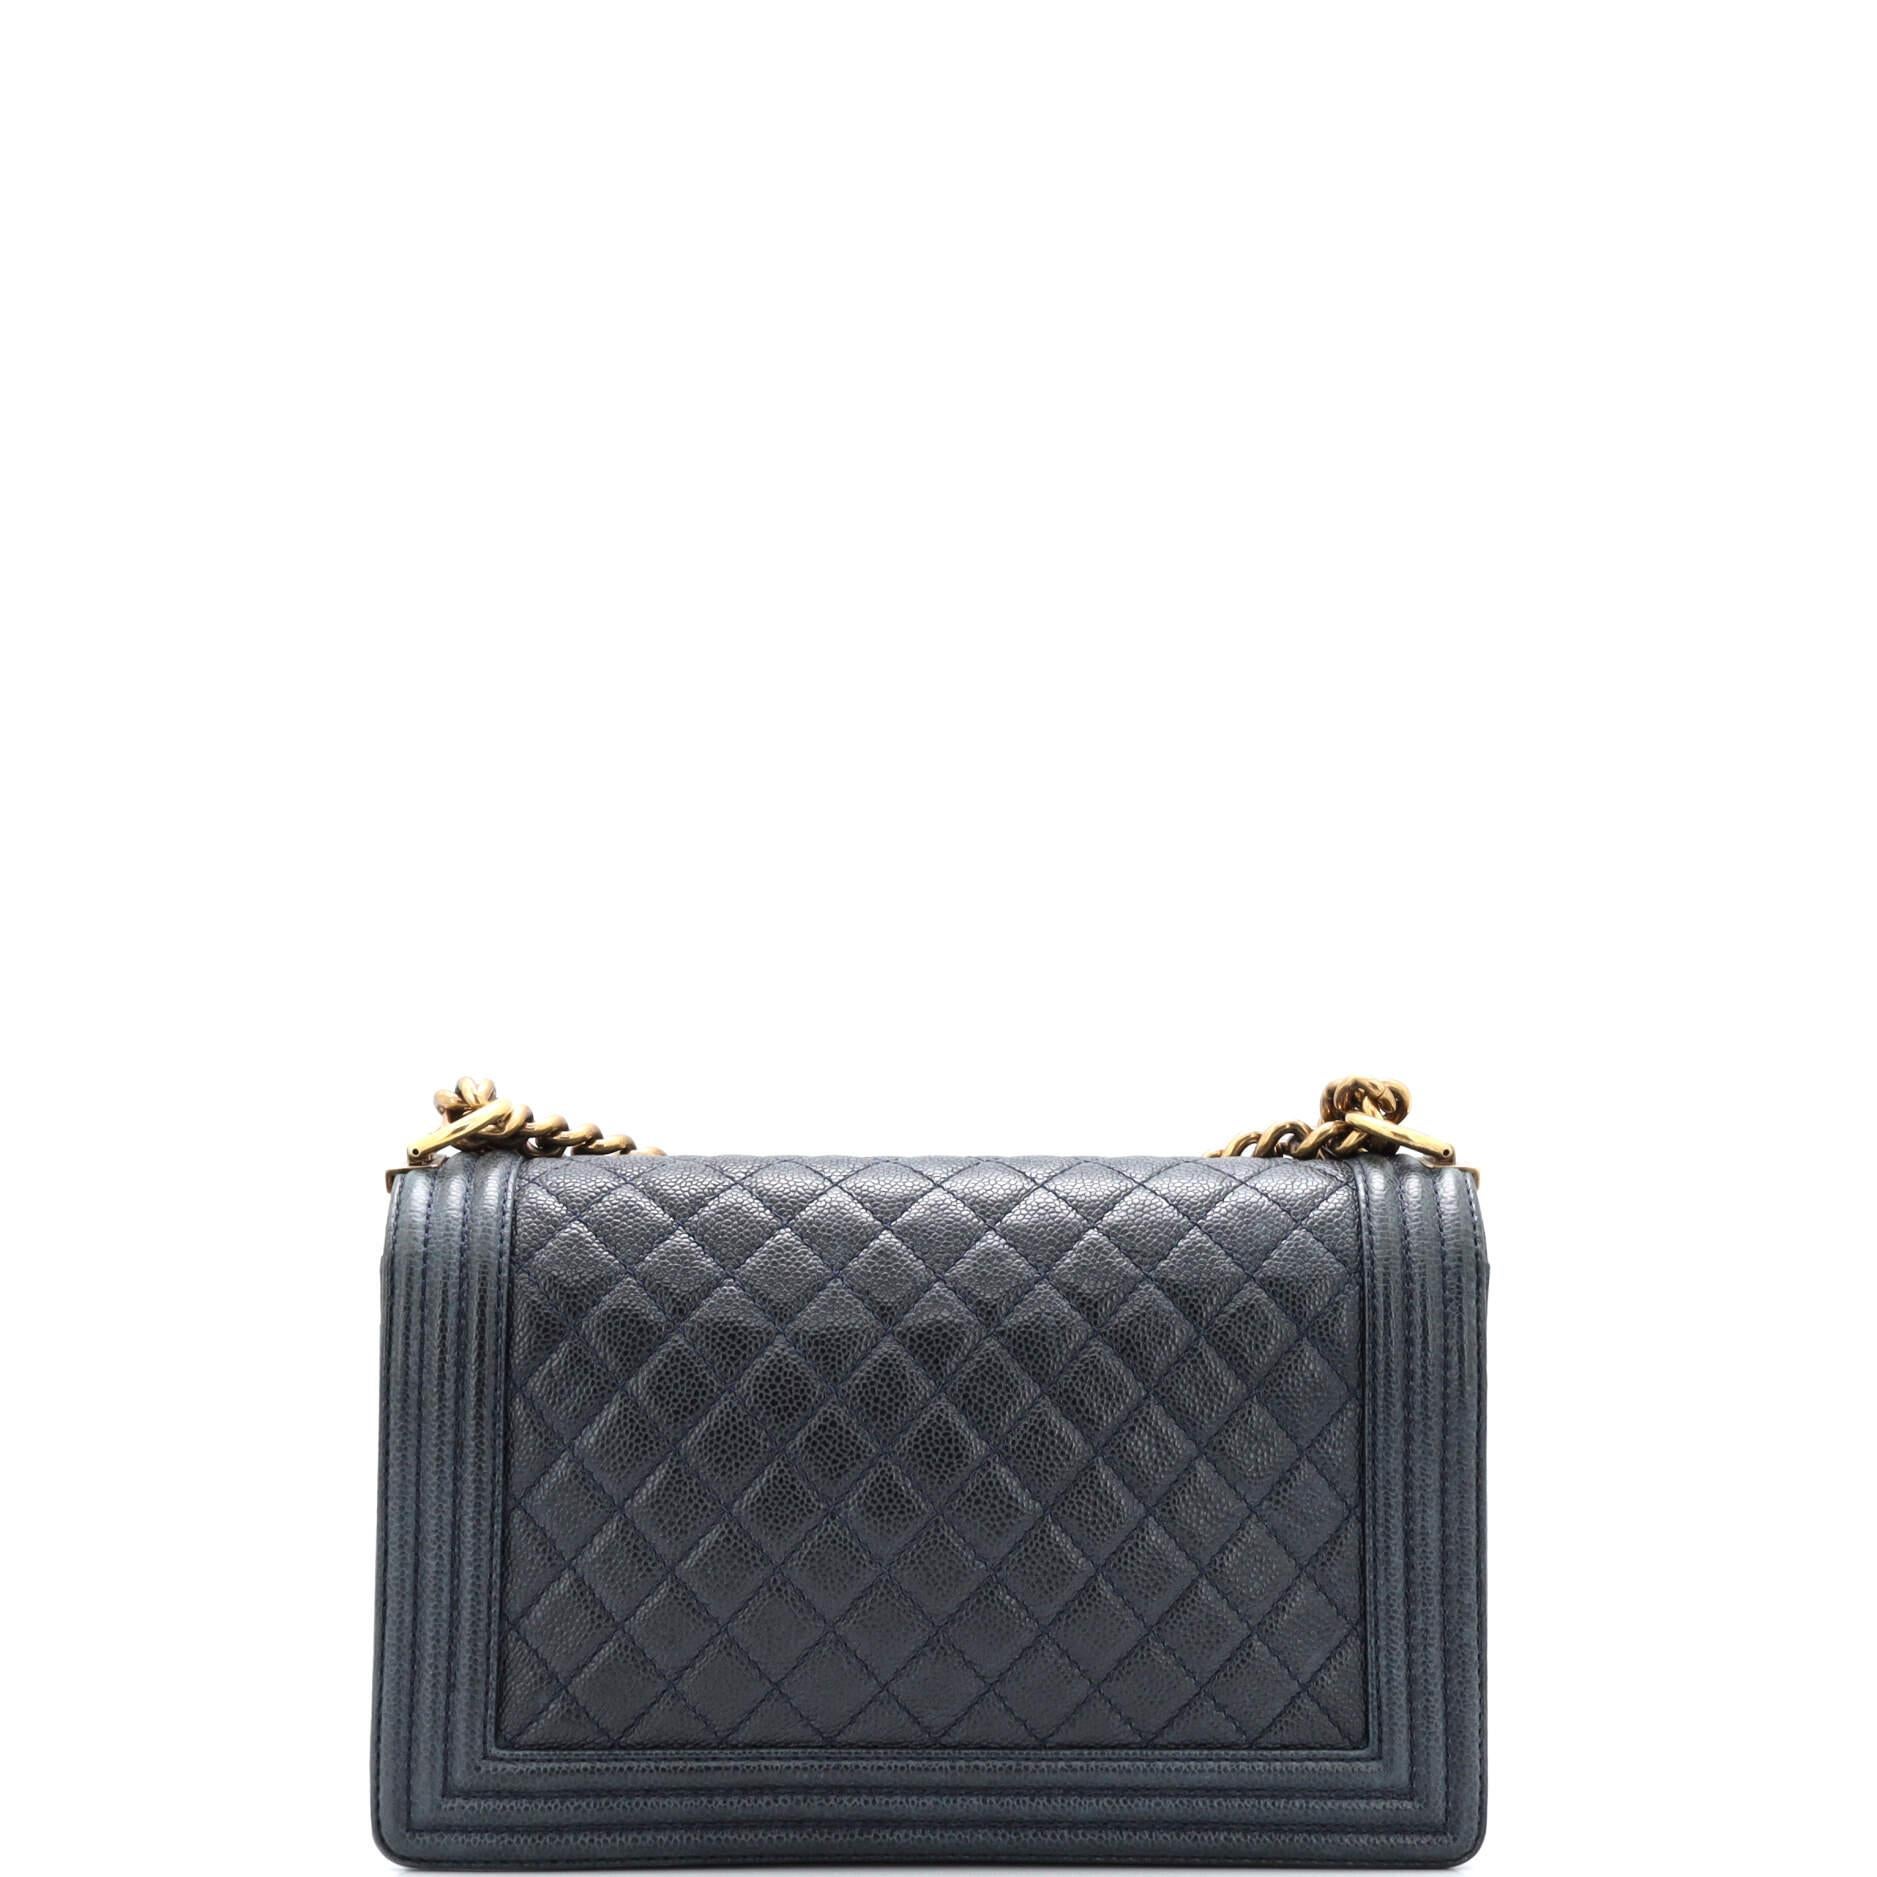 Chanel Boy Flap Bag Quilted Caviar New Medium In Good Condition For Sale In NY, NY